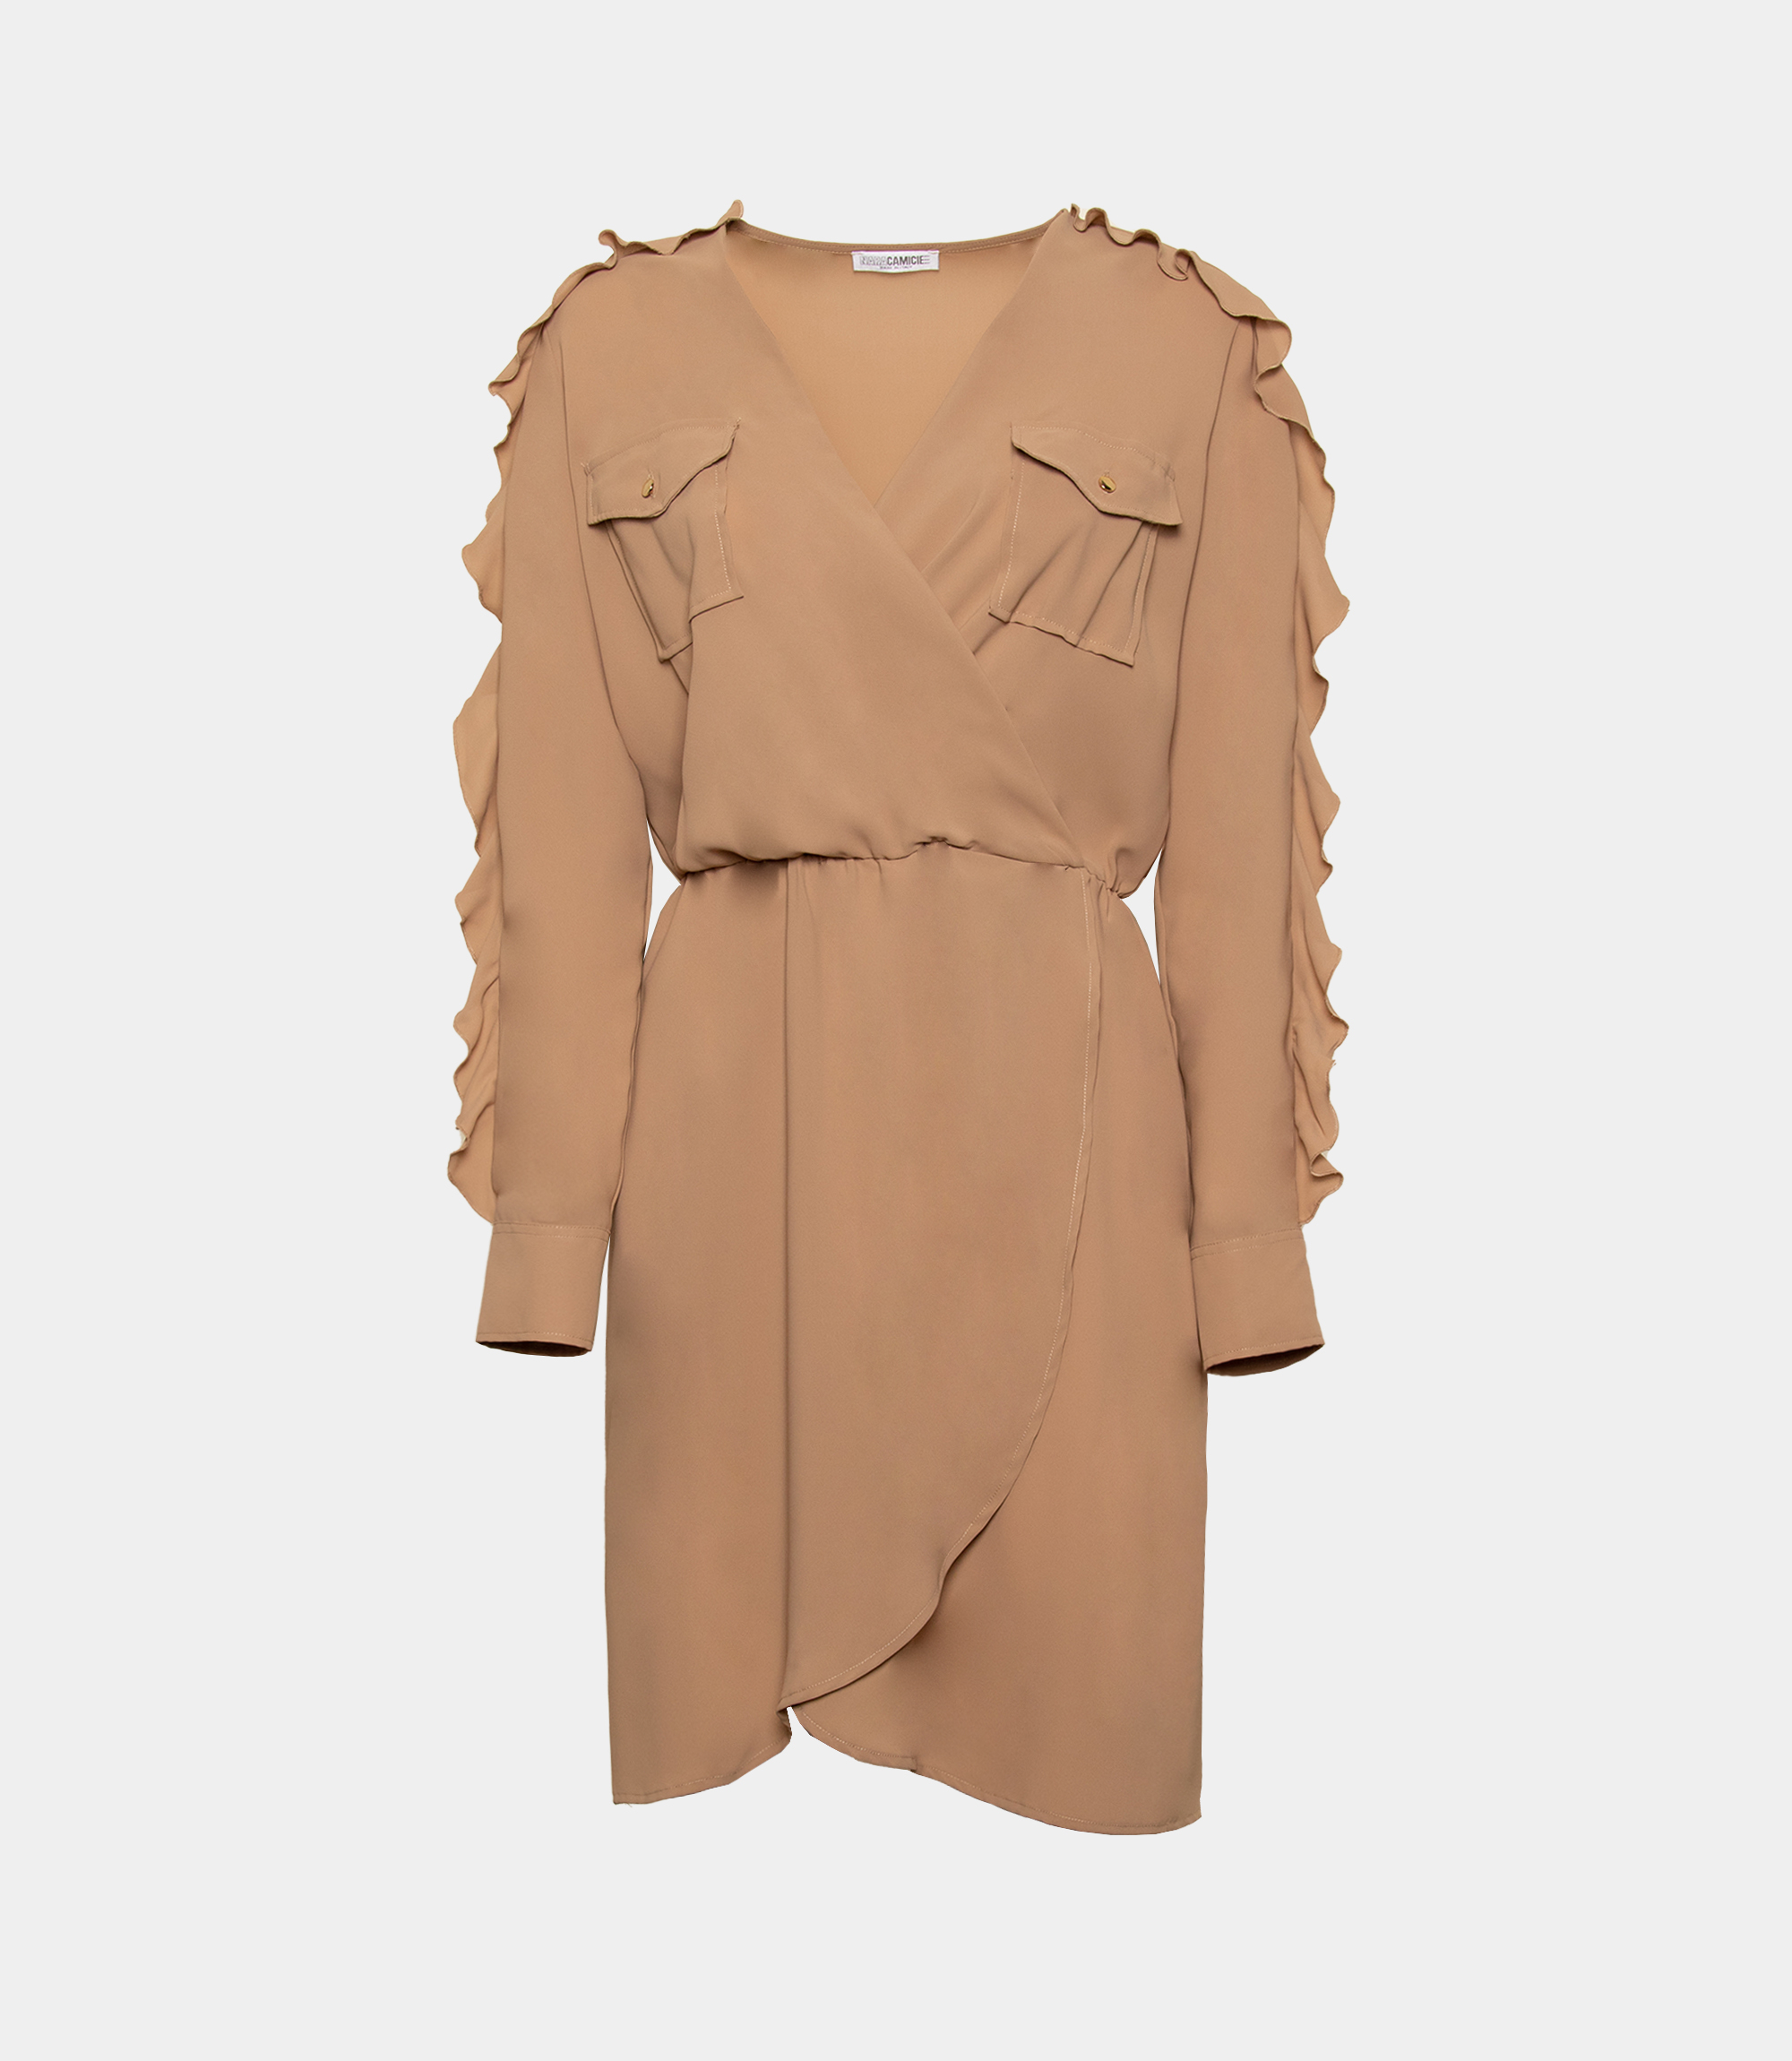 Crisscross dress with rouches - Brown - Nara Milano